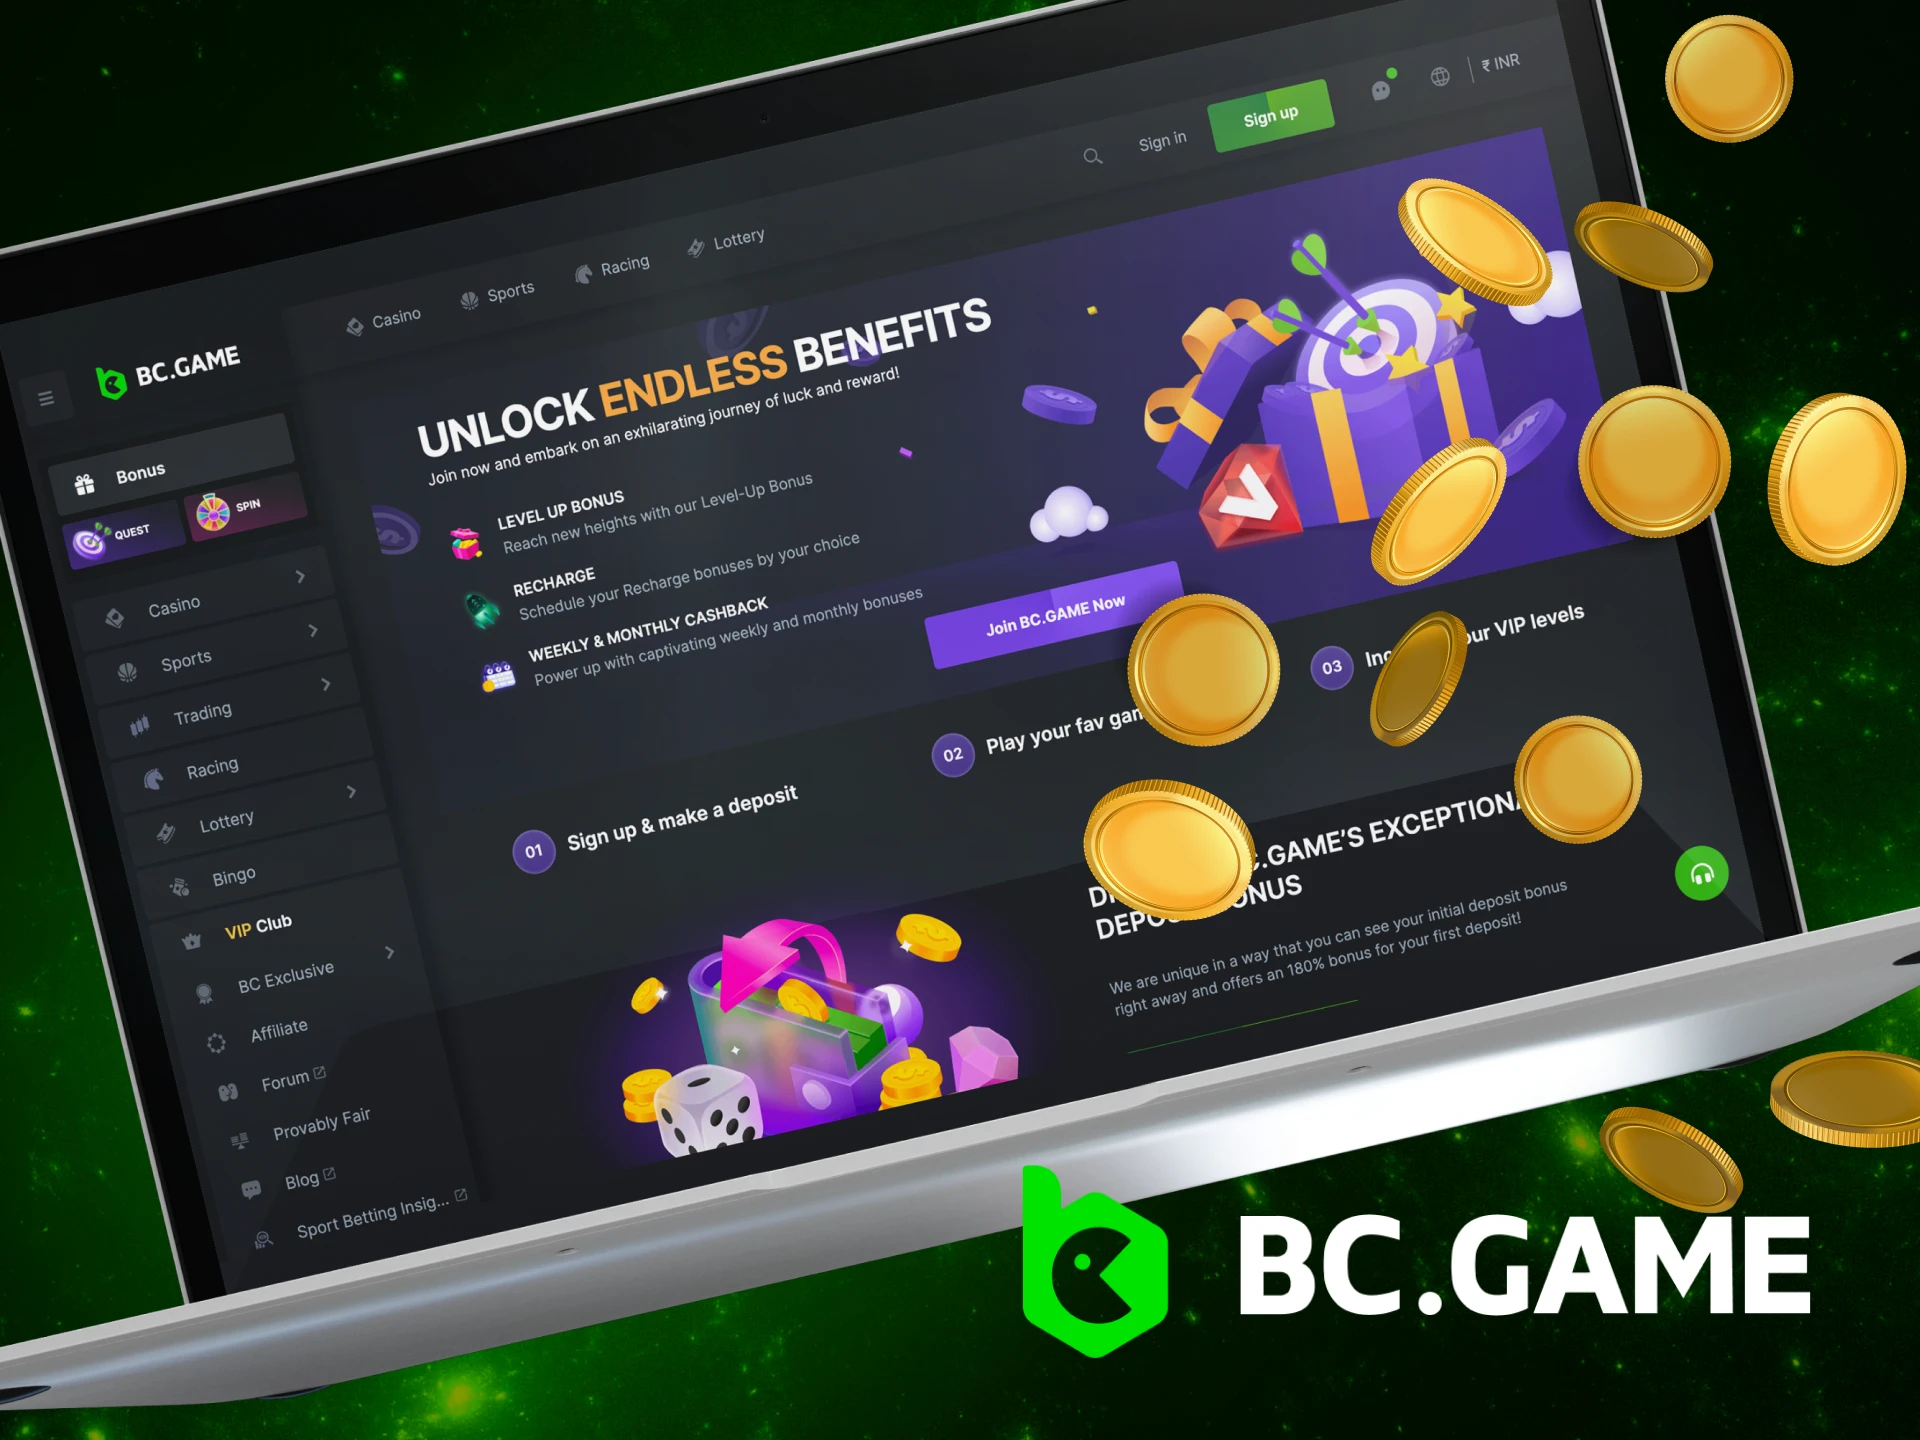 BC Game welcome bonus is available to new players.